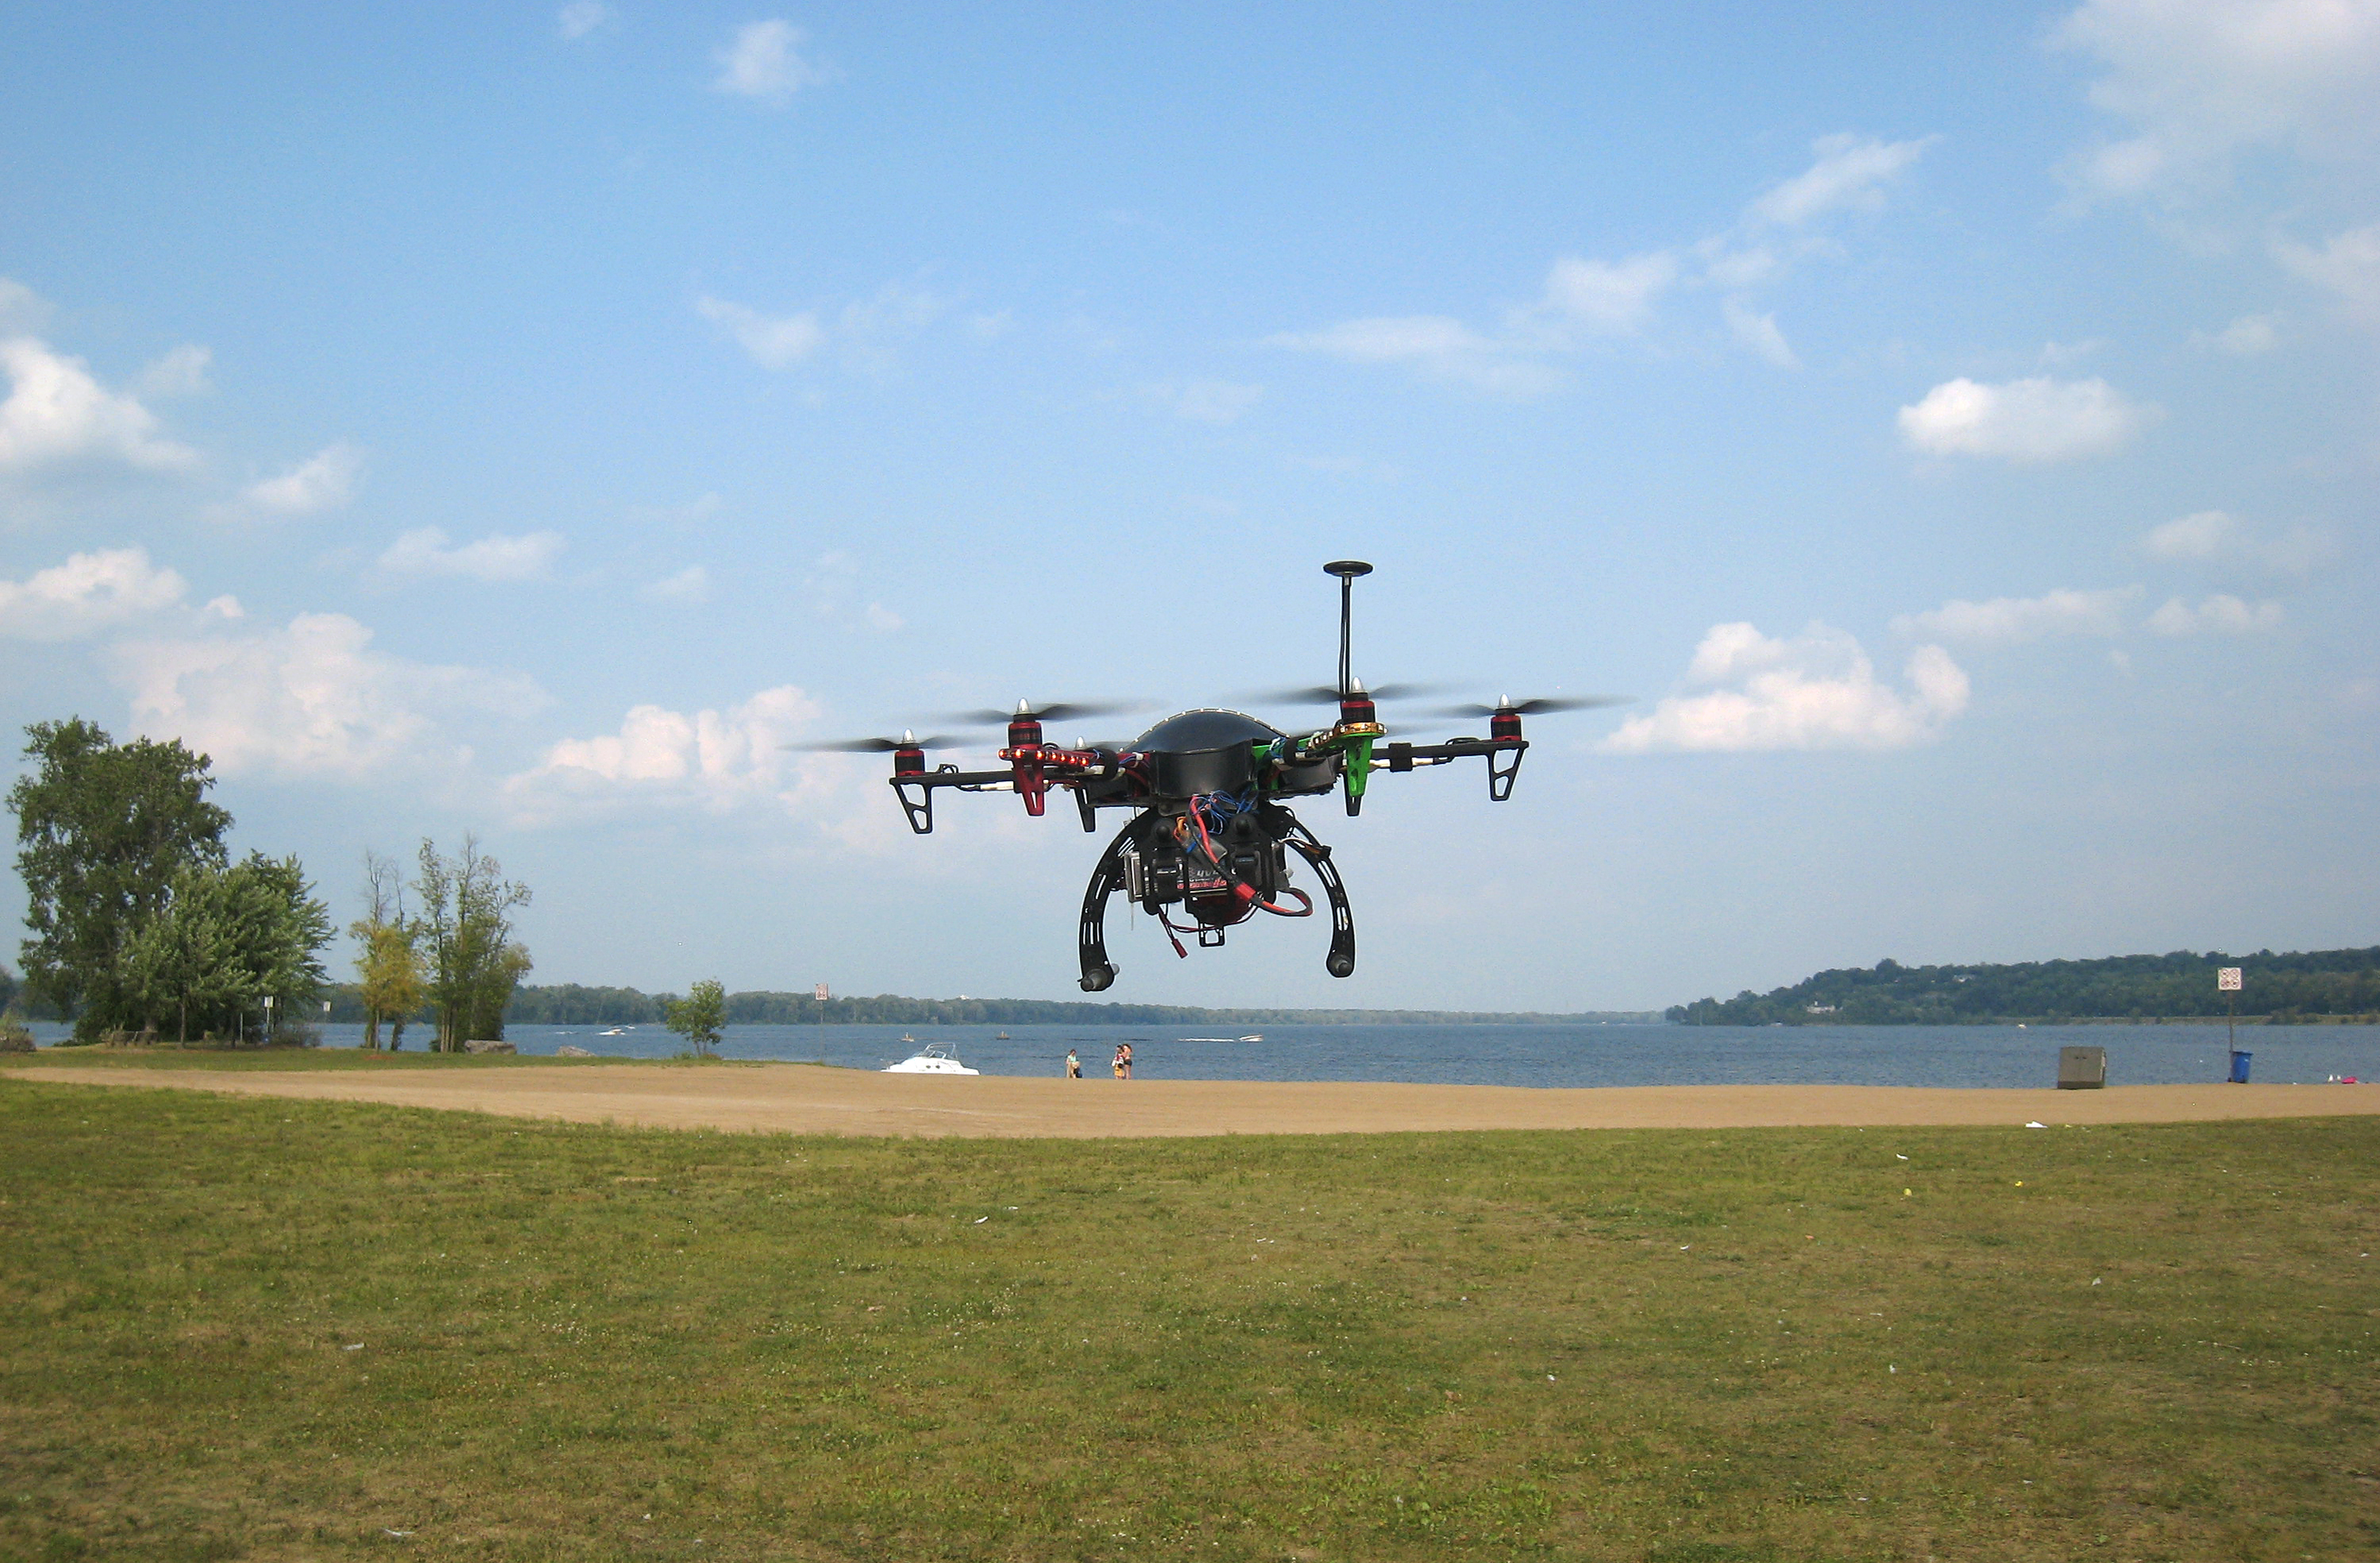 Ask Drone Girl: how do I build a recreational drone park? - The ...